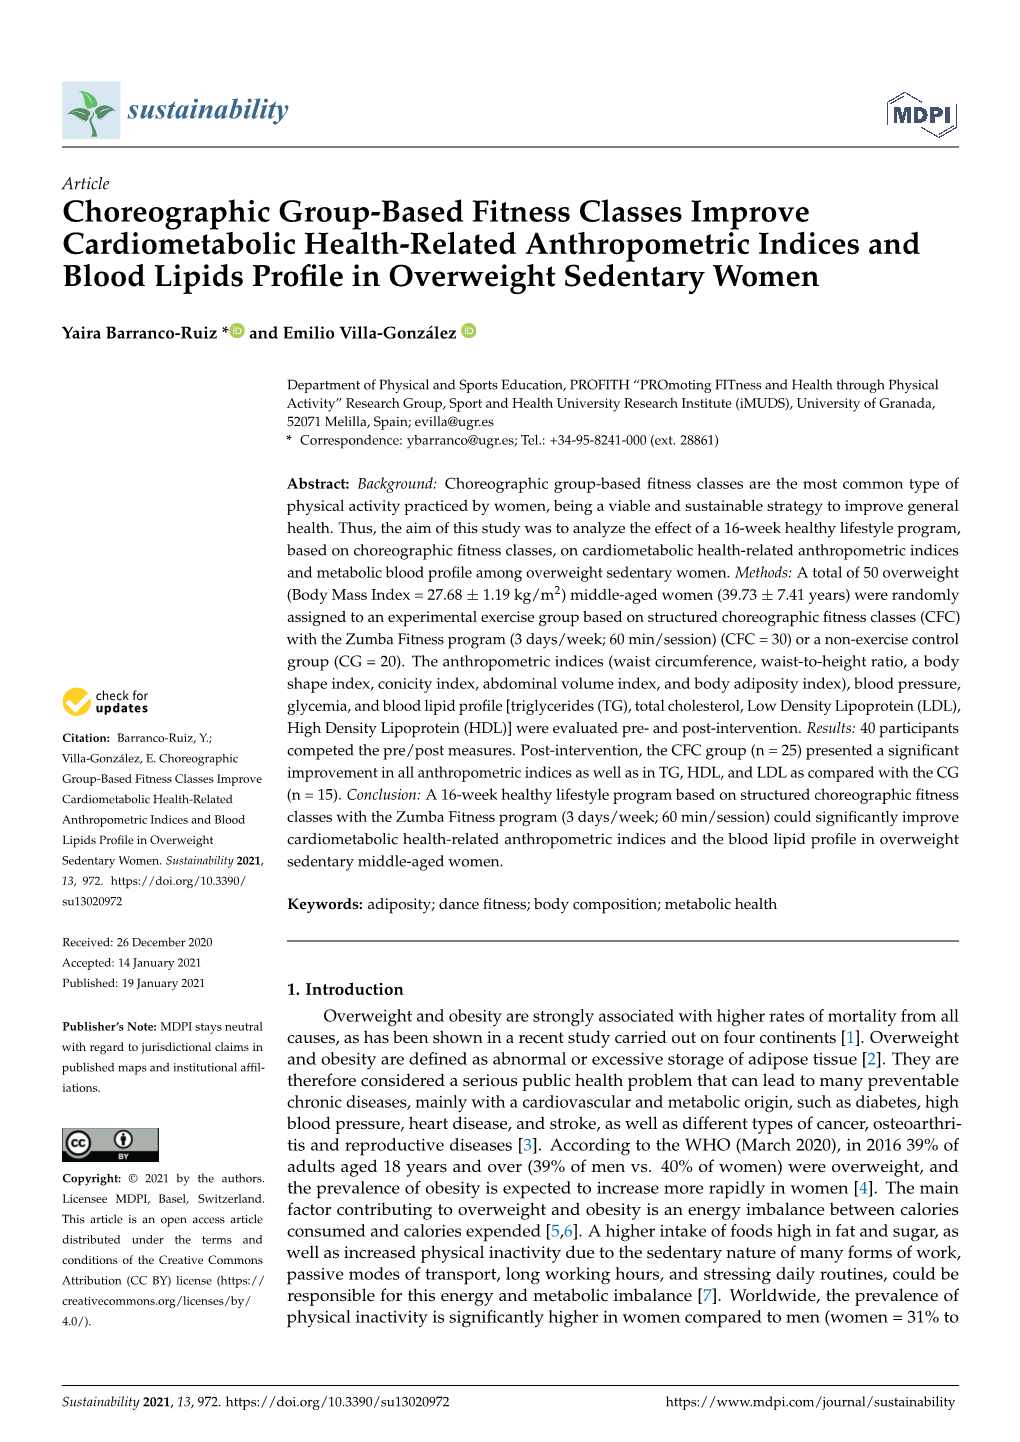 Choreographic Group-Based Fitness Classes Improve Cardiometabolic Health-Related Anthropometric Indices and Blood Lipids Profile